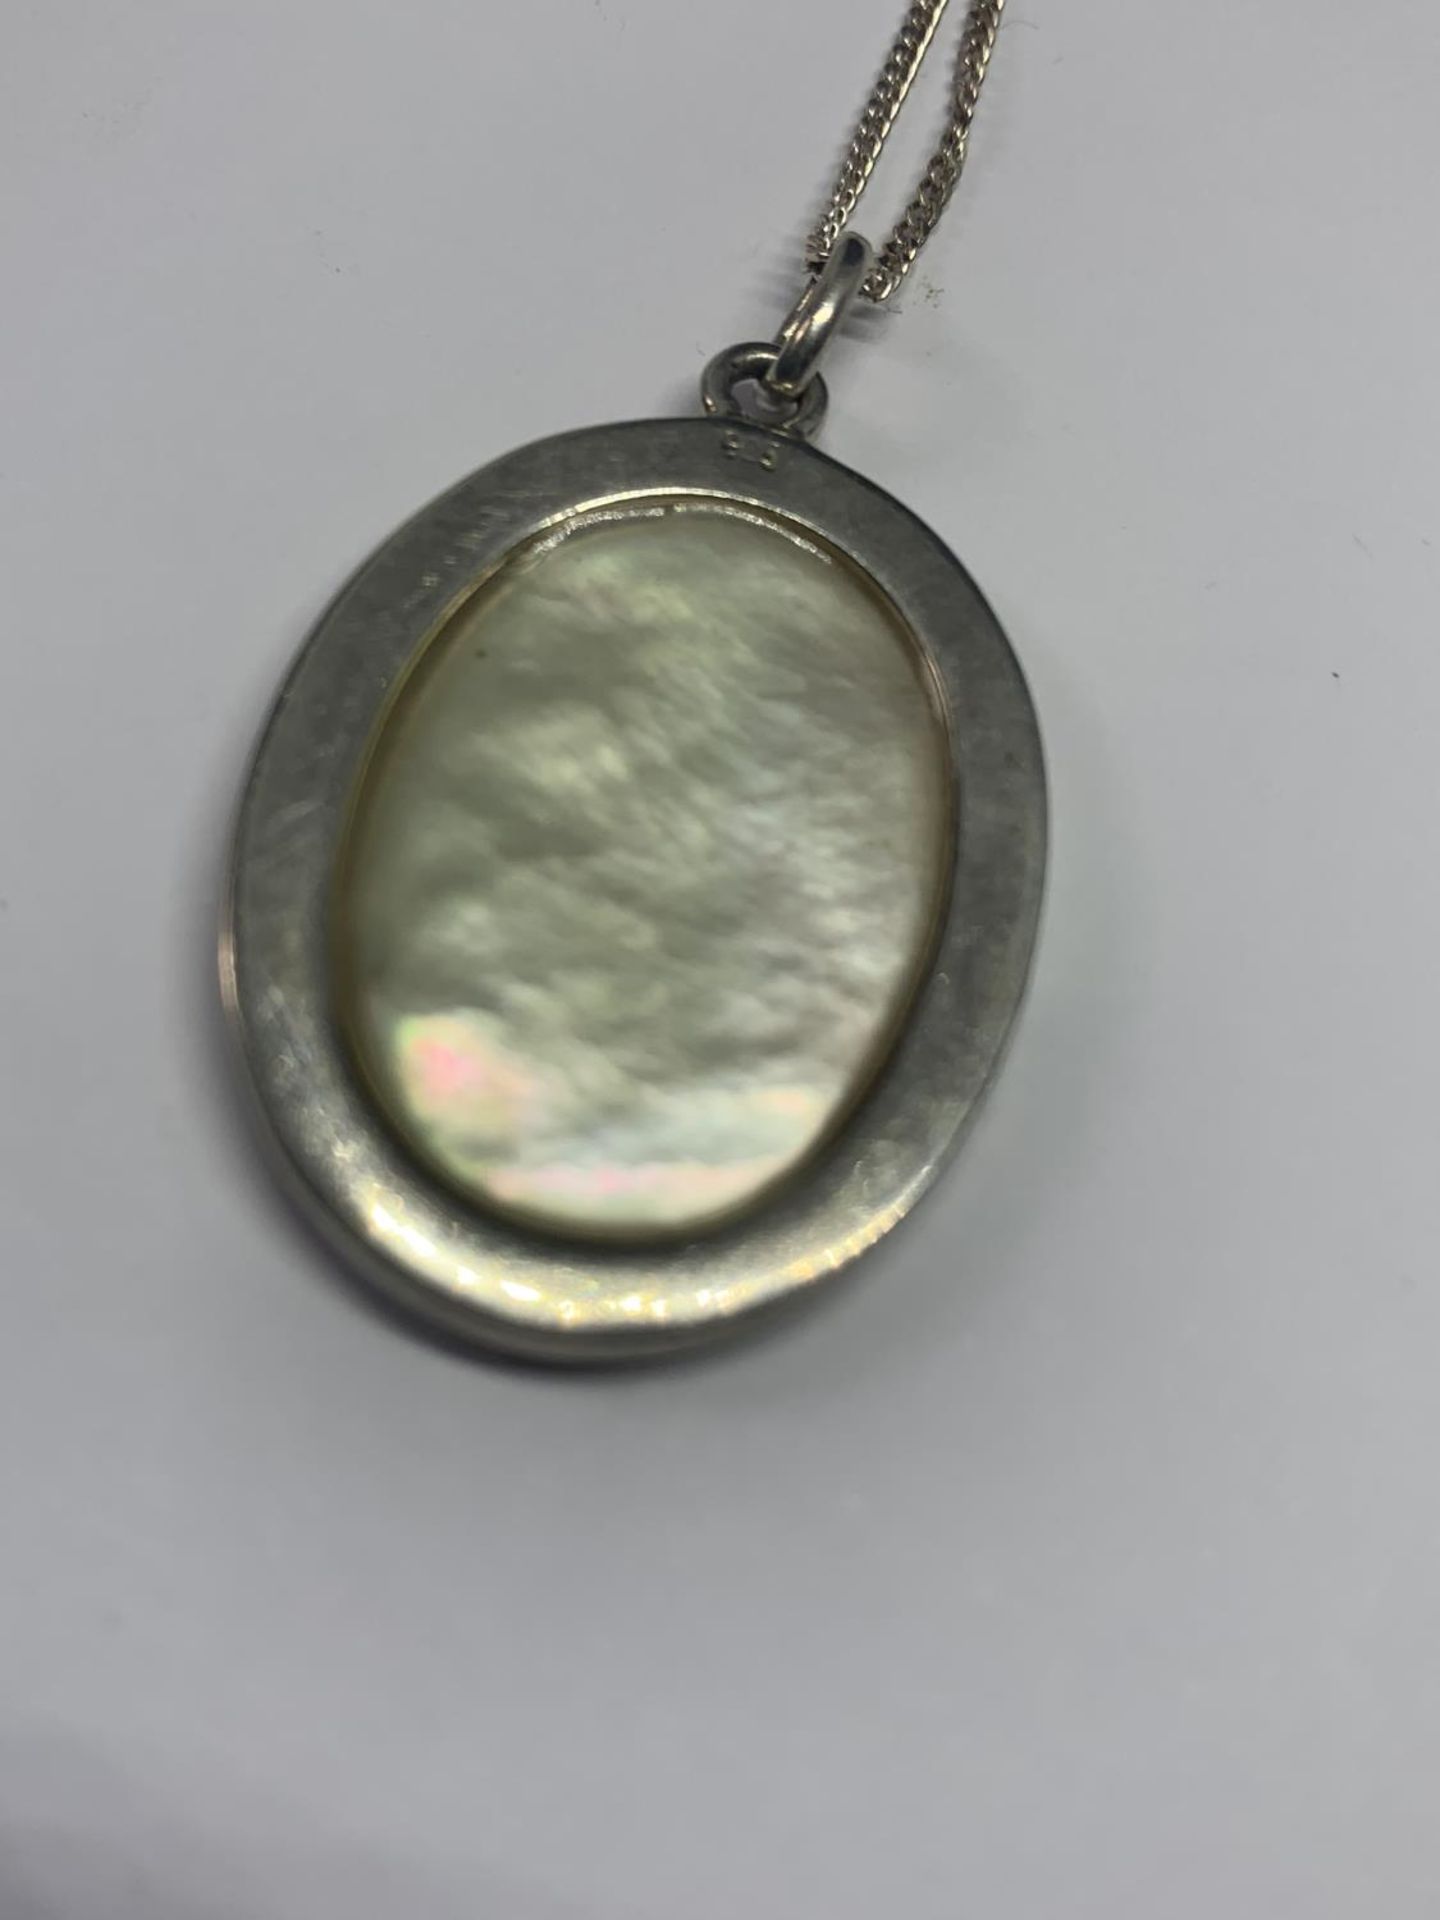 TWO SILVER NECKLACES WITH PENDANTS - Image 6 of 10